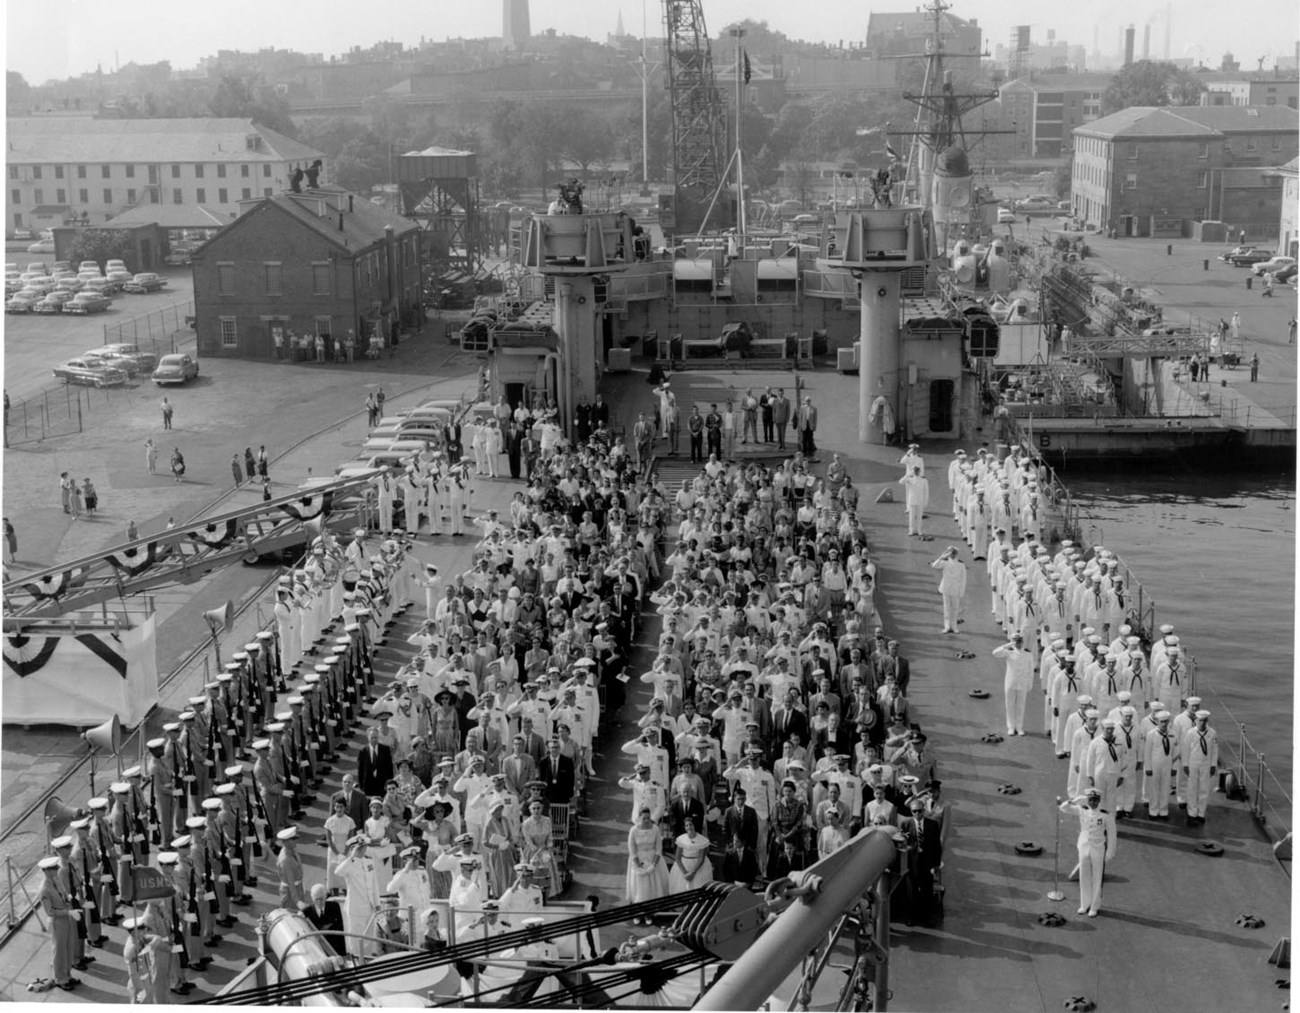 a ship's commissioning ceremony with sailors lined up and an audience of military personnel and civilians.